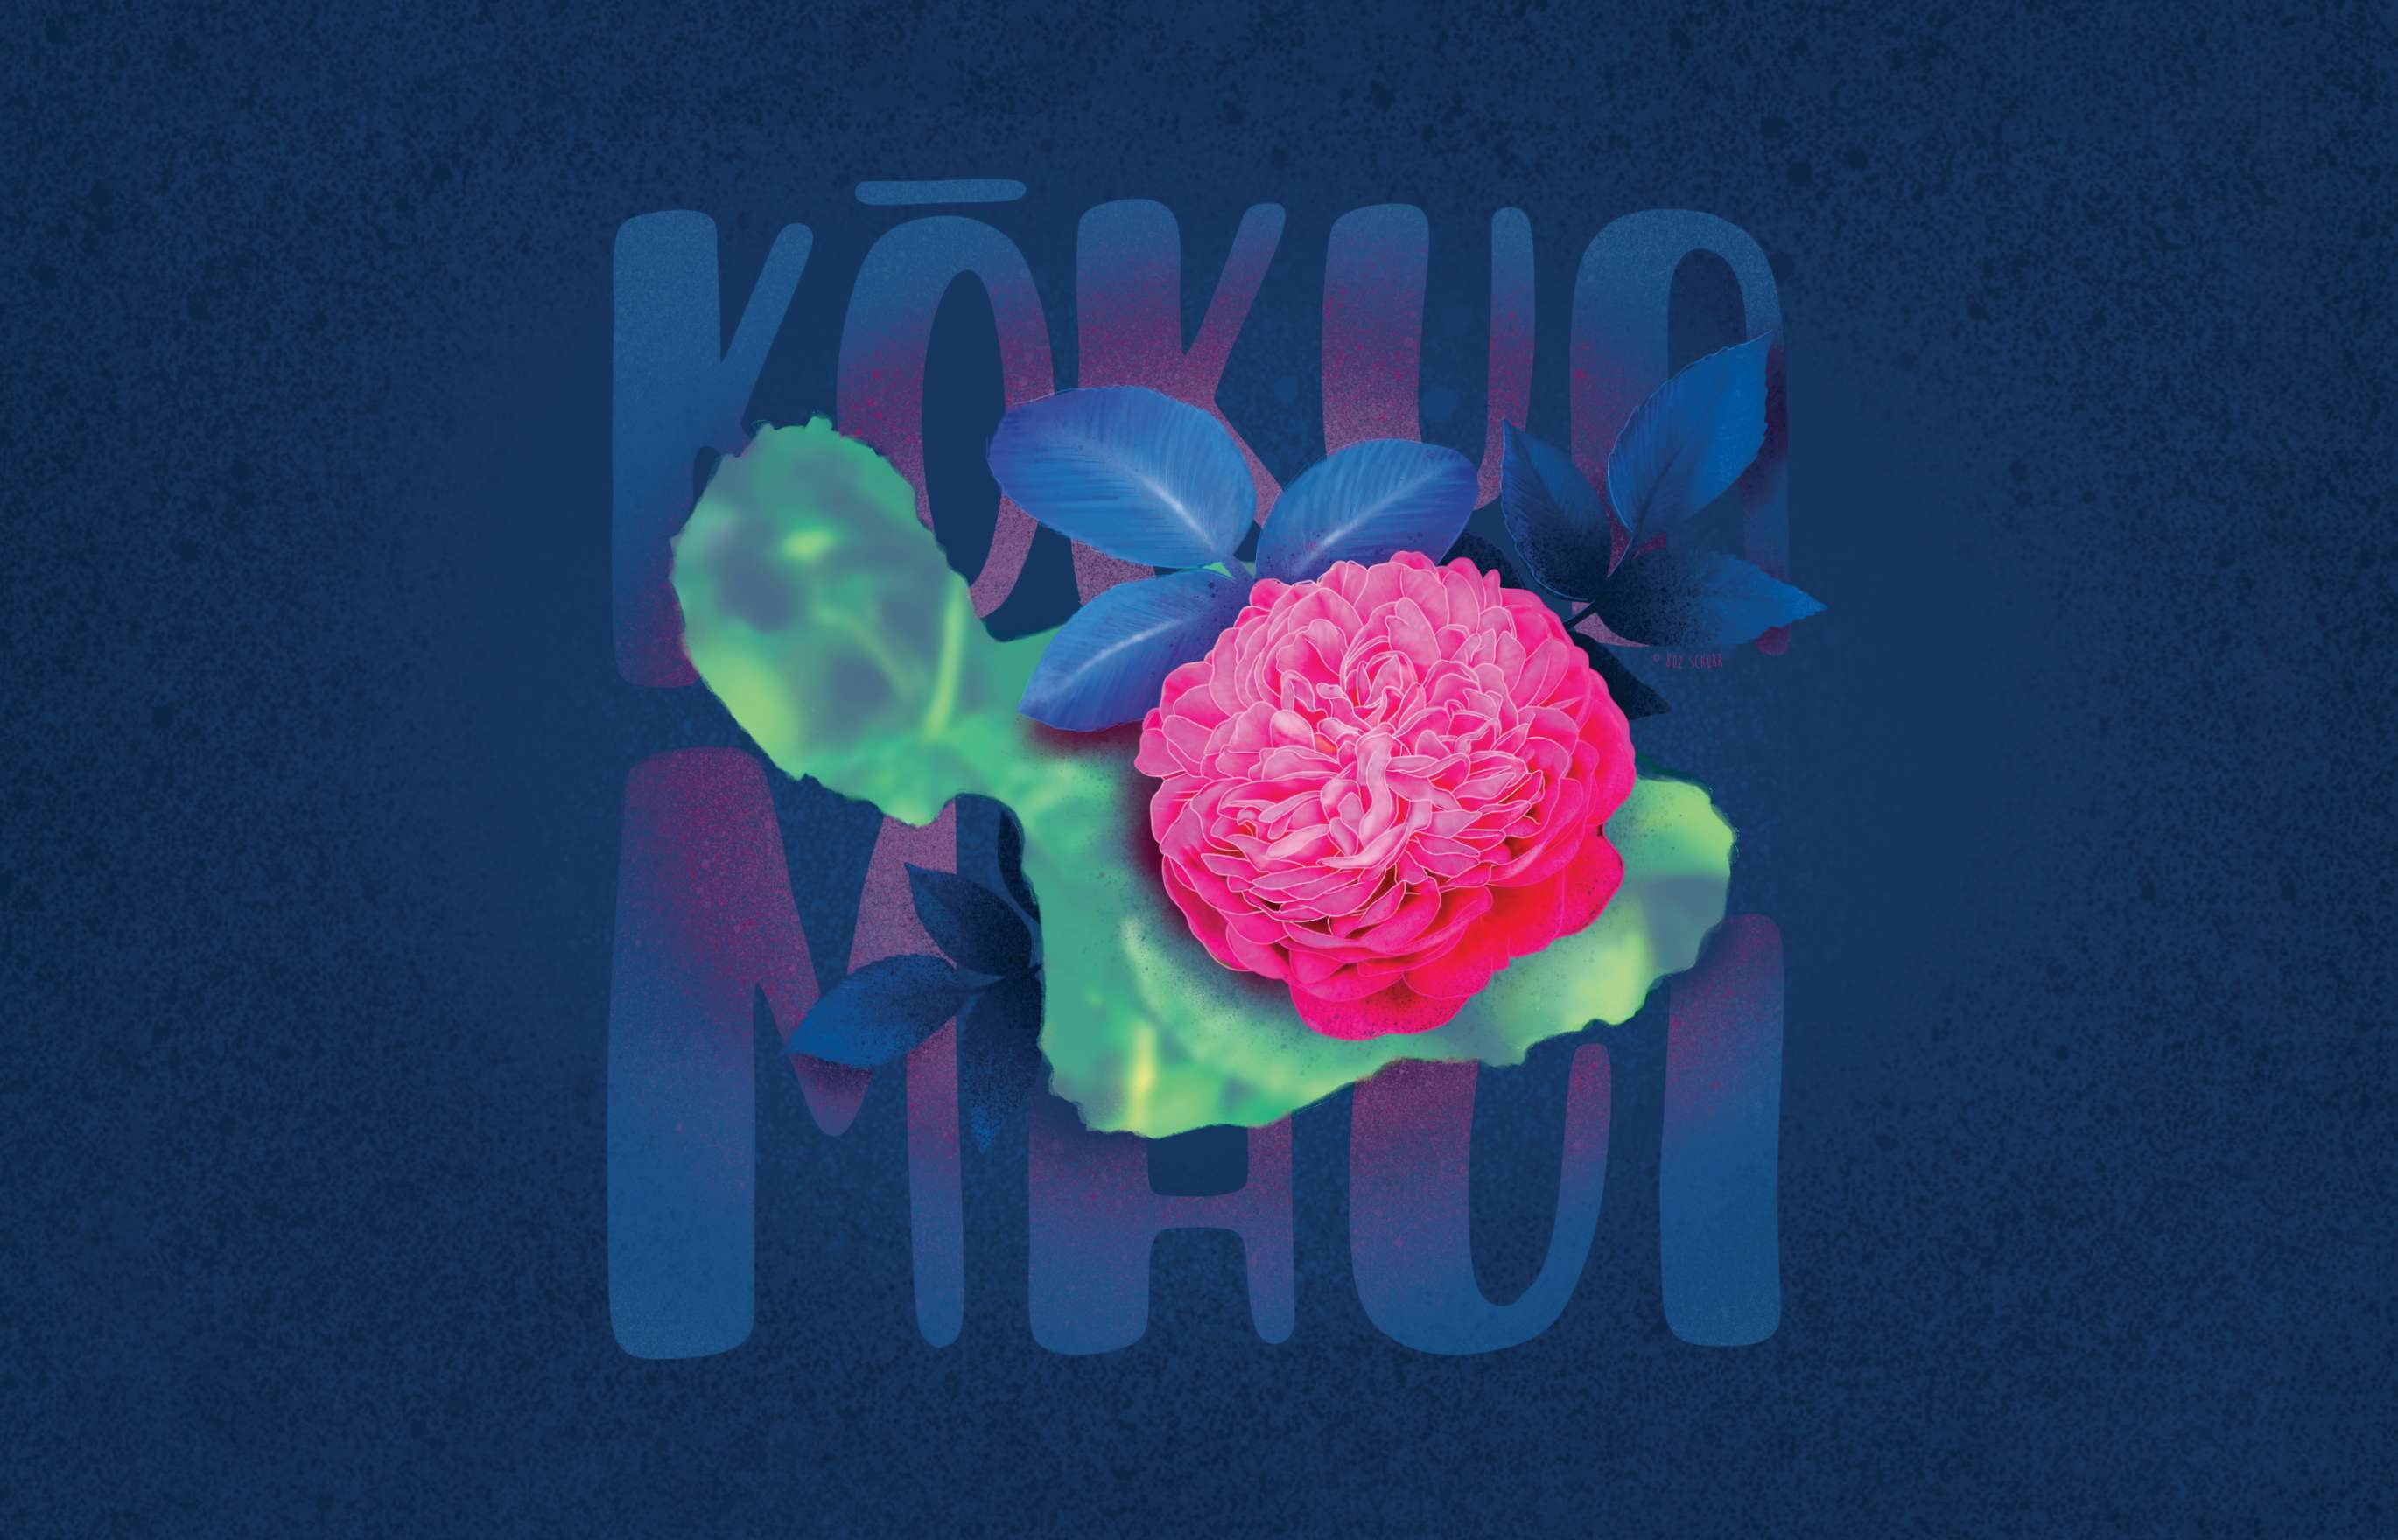 Illustration featuring the Lokelani rose, a pink flower that is a symbol of Maui. In the background are the words “Kōkua Maui” set on a blue, textured field.